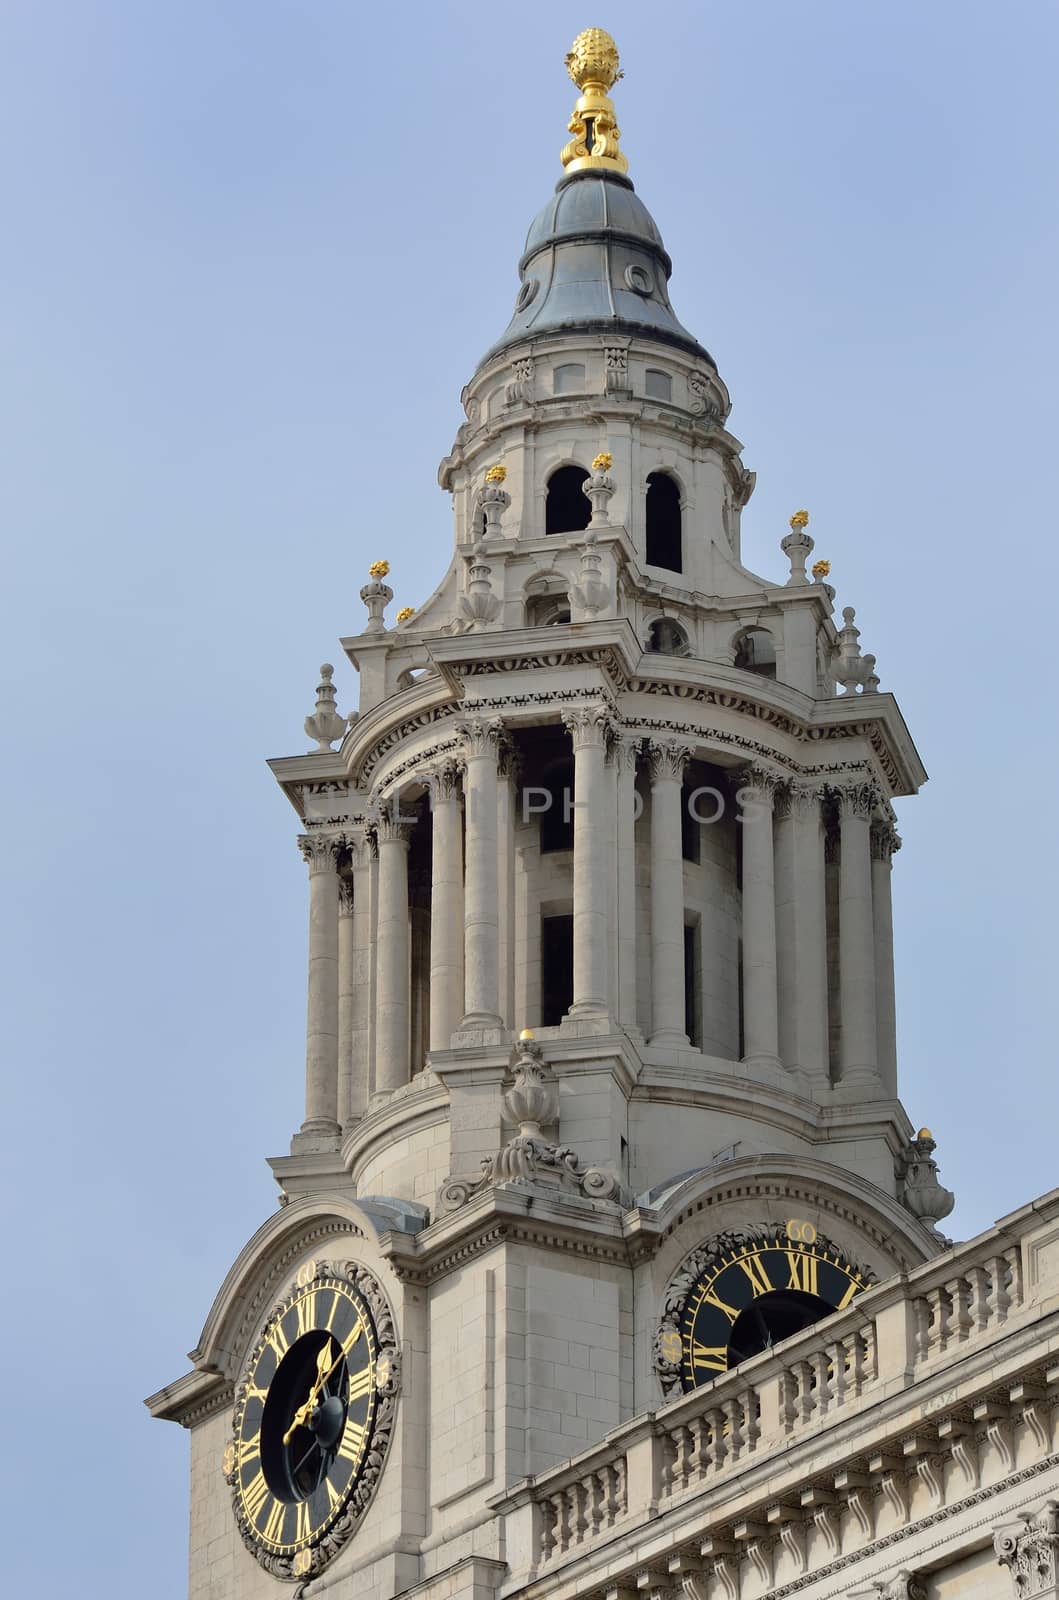 Clock Tower of St Pauls Cathedral by pauws99